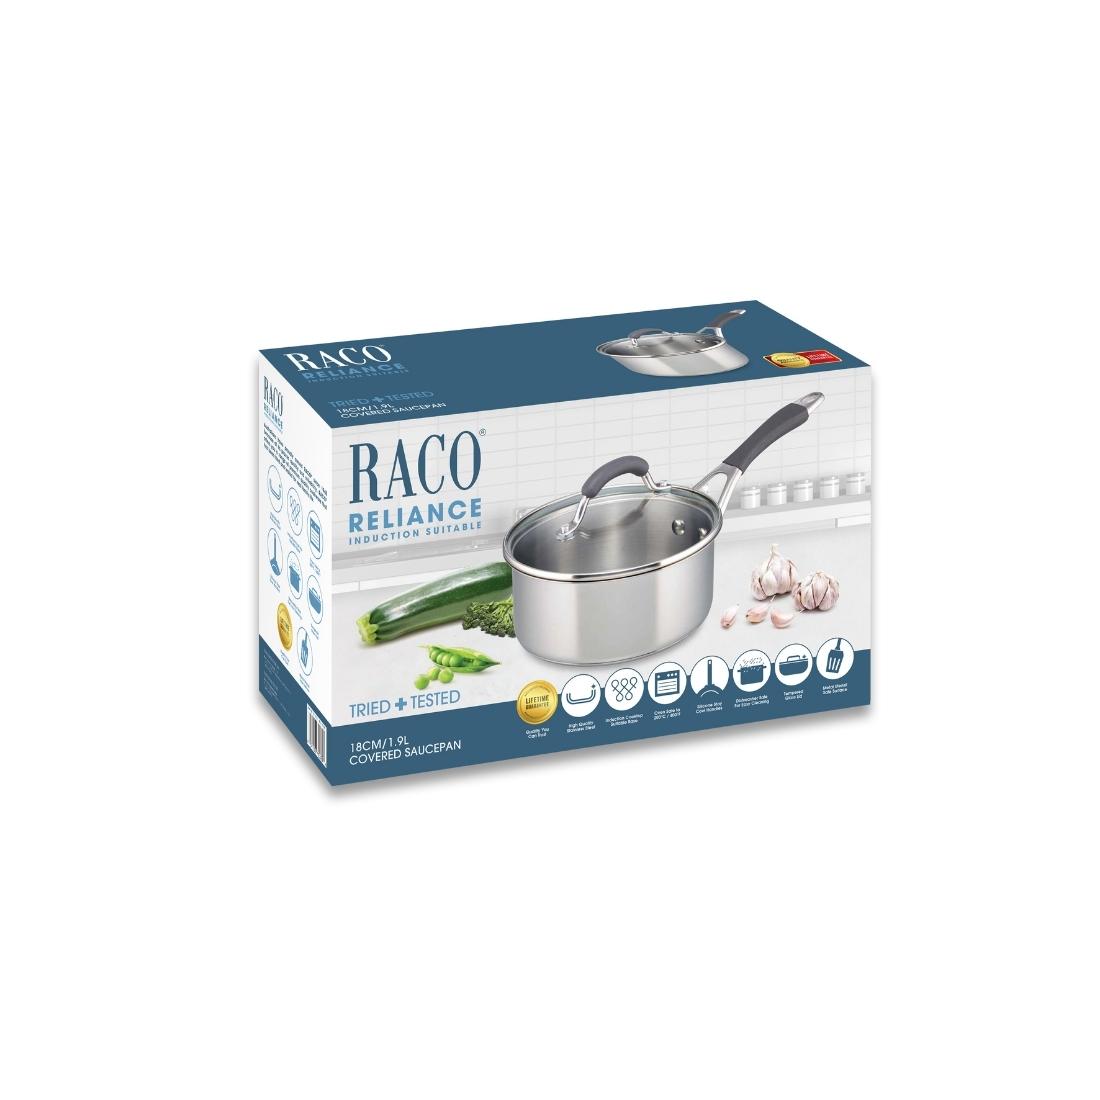 RACO Reliance Stainless Steel Induction Saucepan 18cm/1.9L